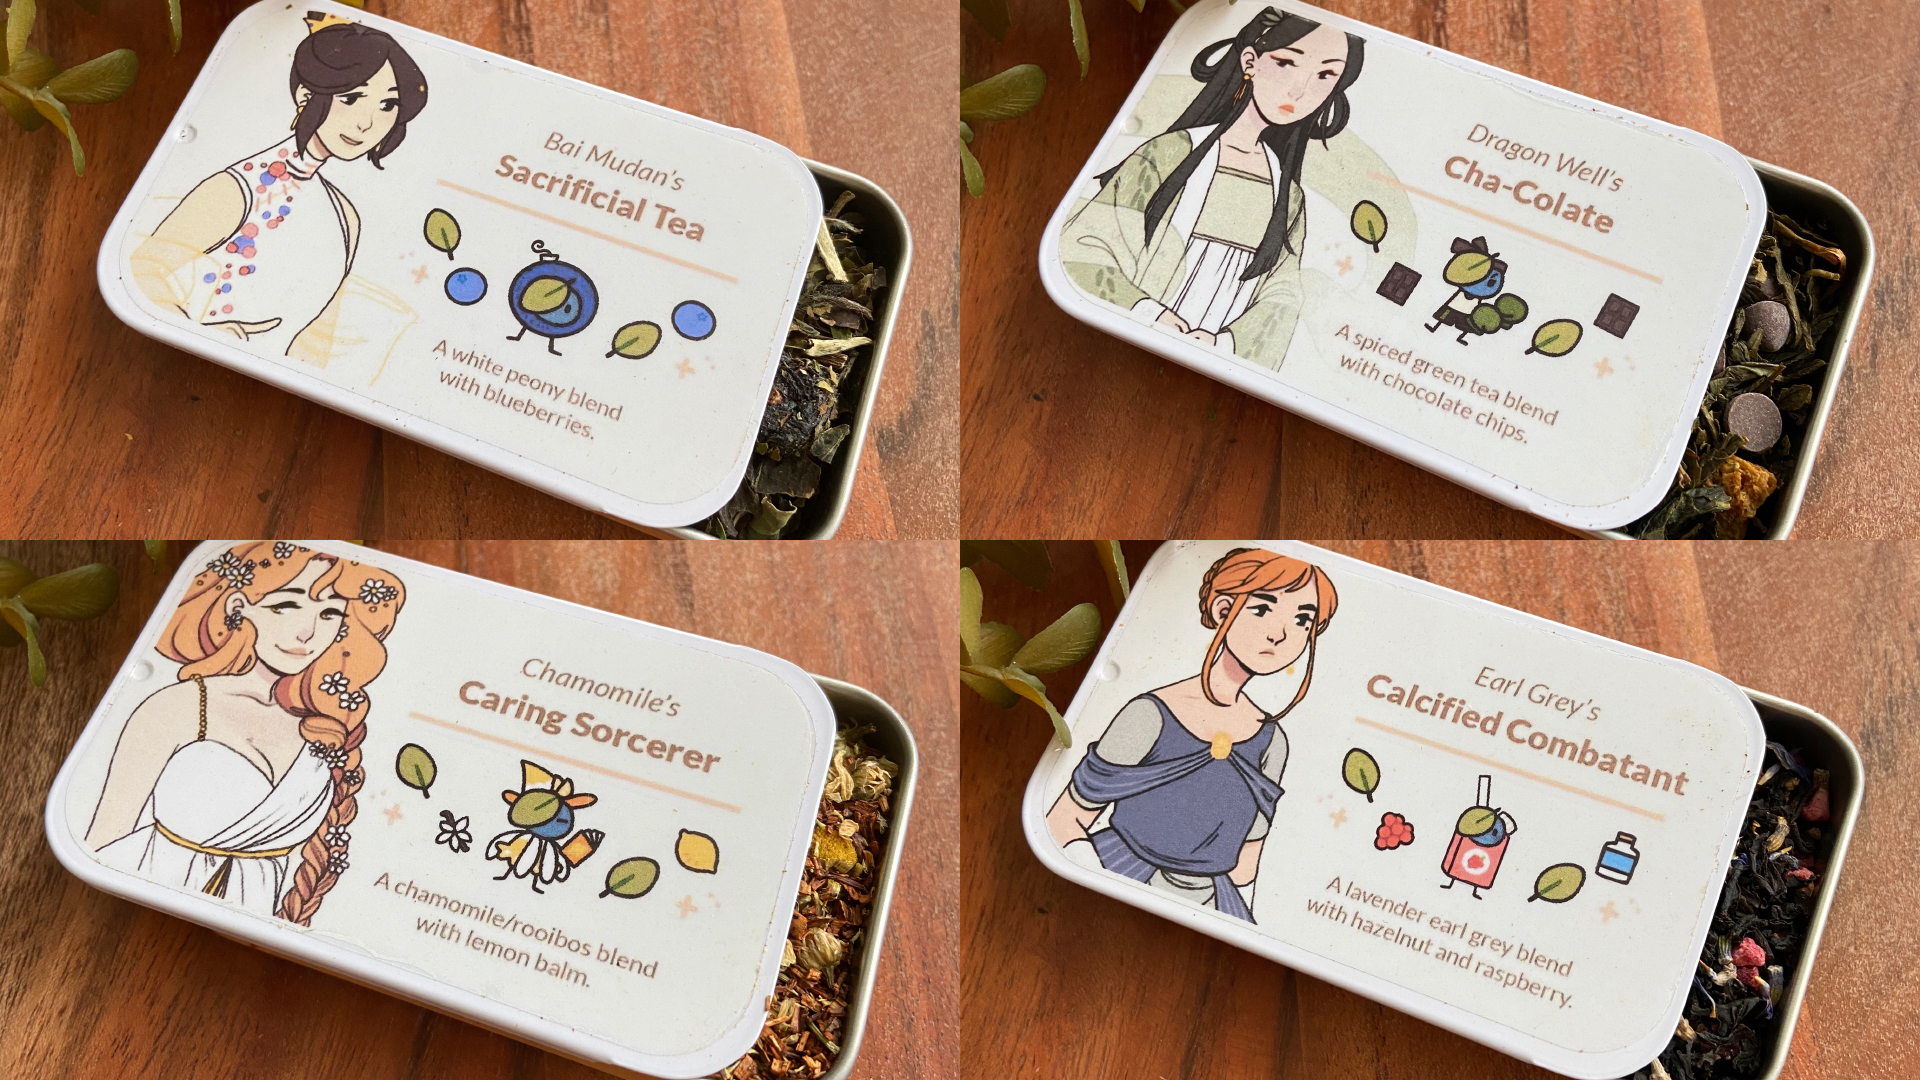 Image depicting four small tins of teas, themed after Sovereign Tea, now available on Adagio